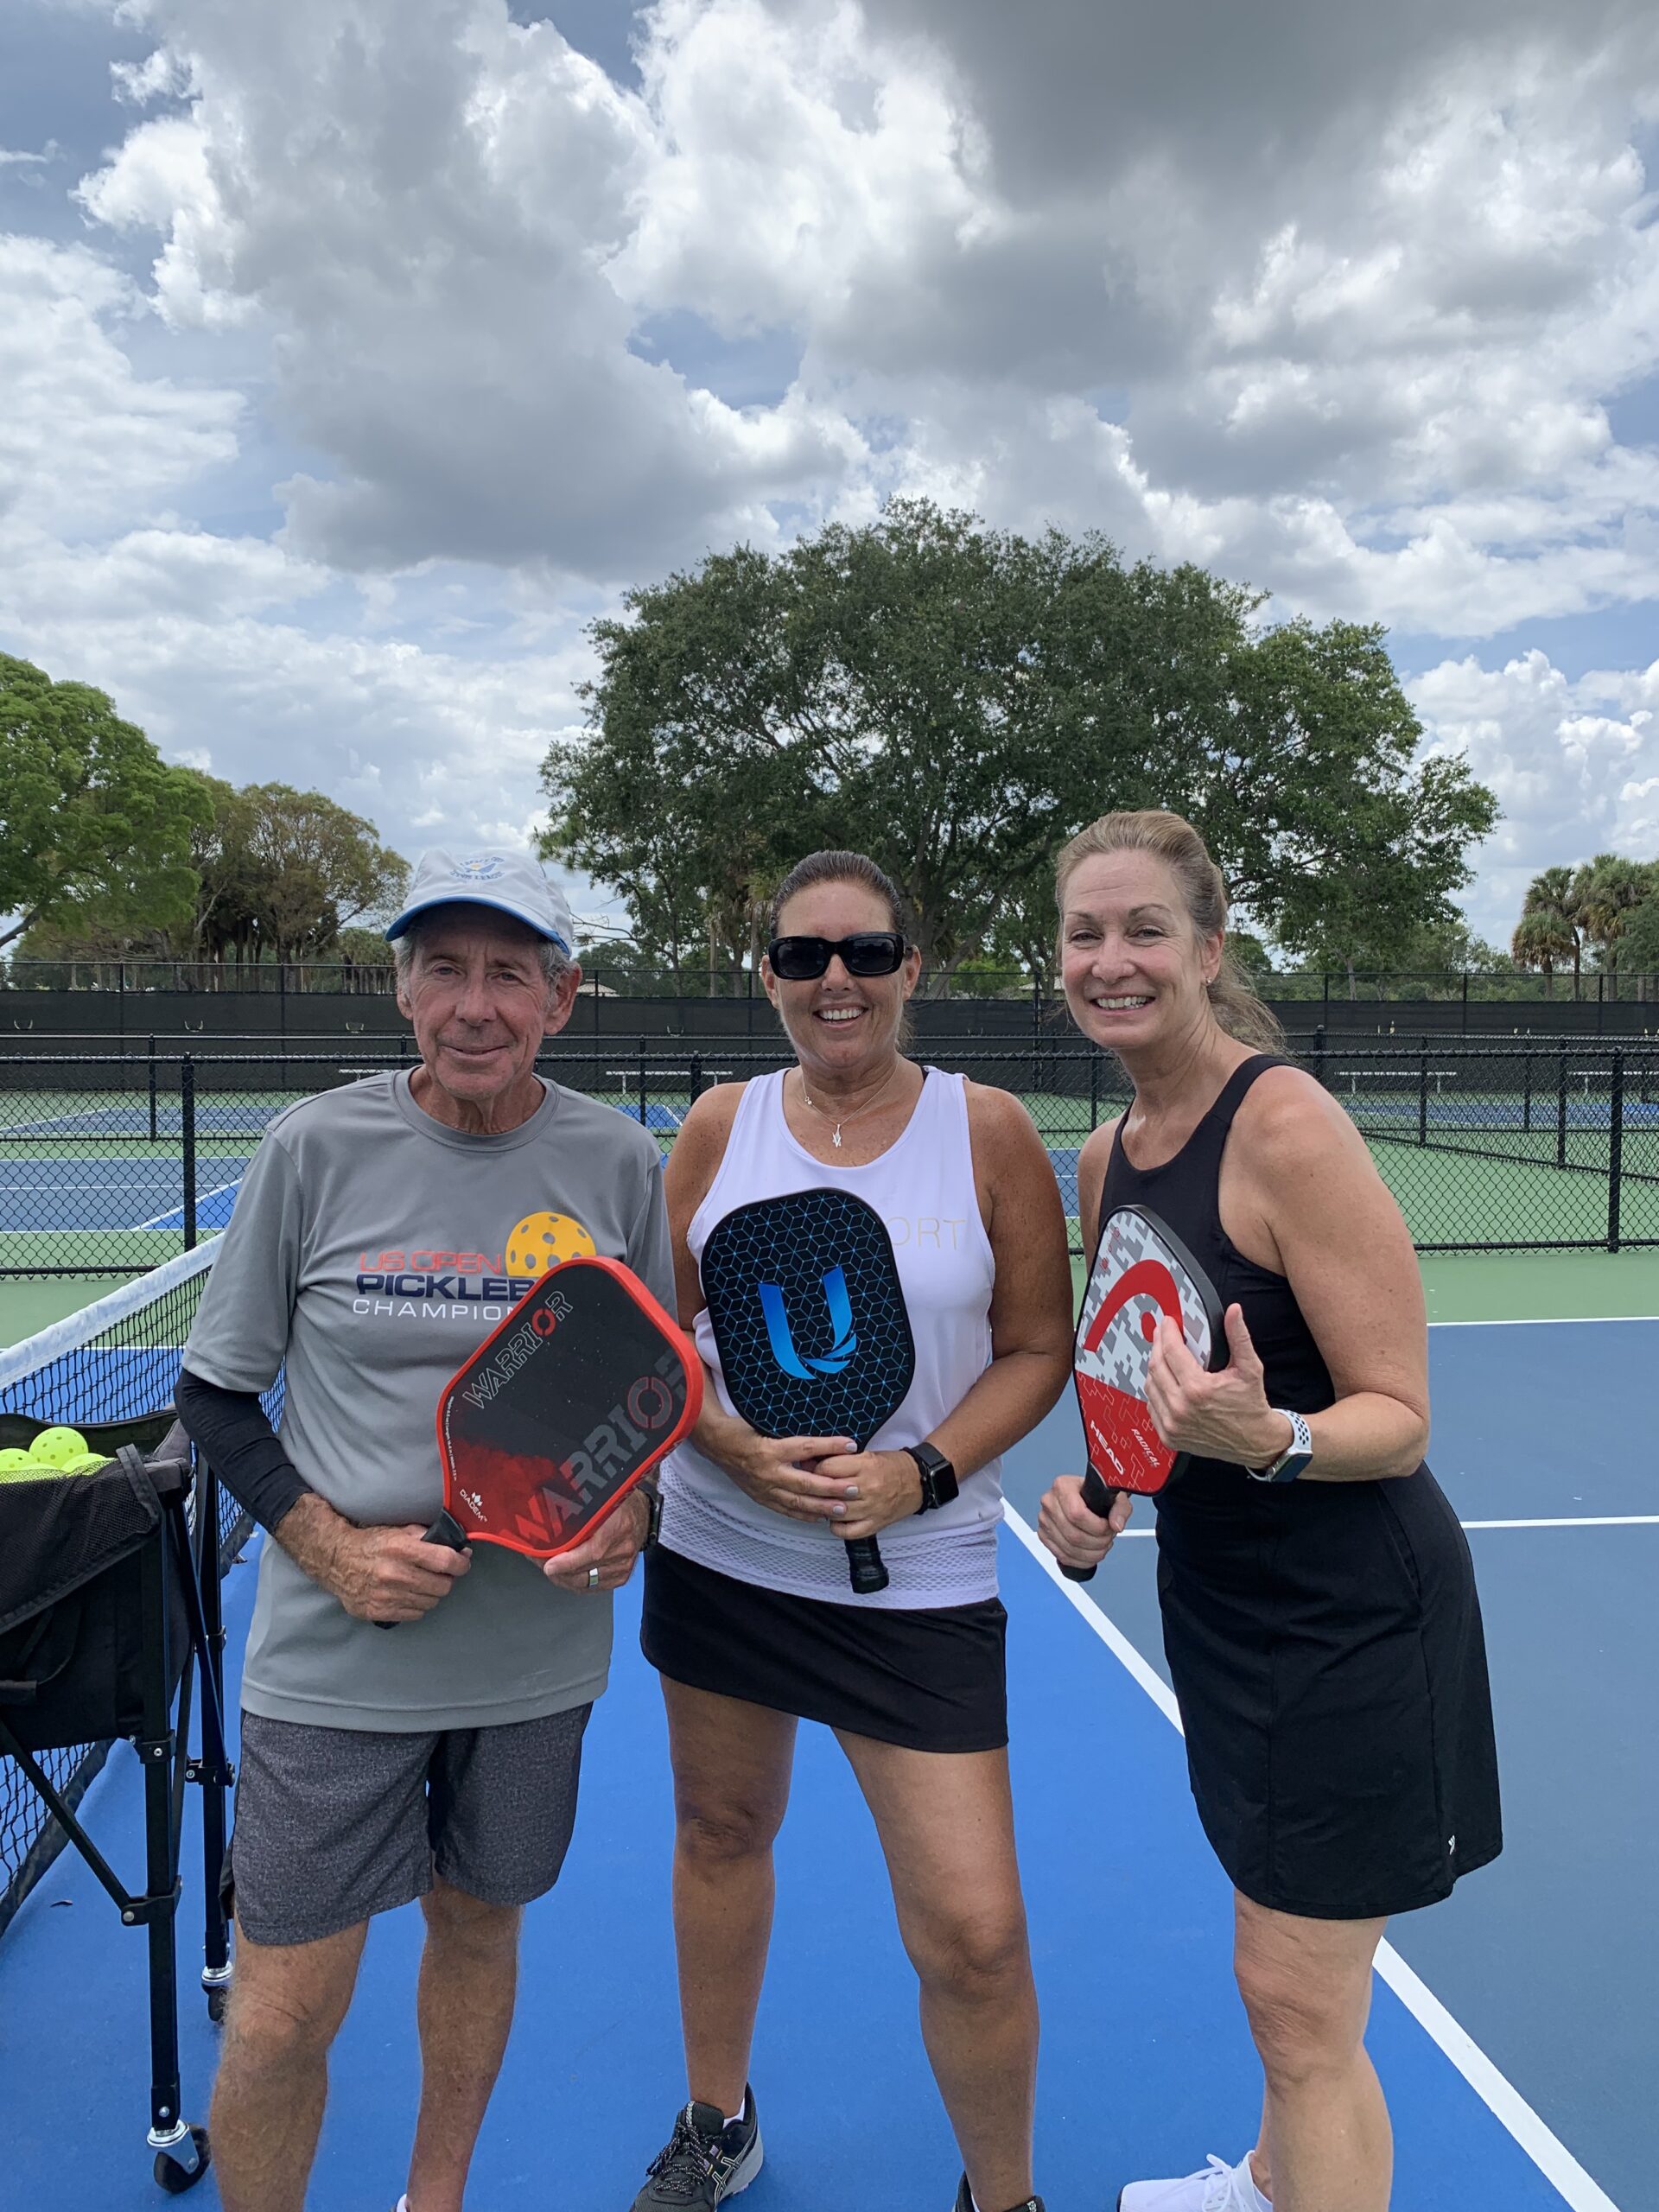 bob-with-jodi-and-kathy-after-a-beginners-pickleball-clinic-in-boca-raton